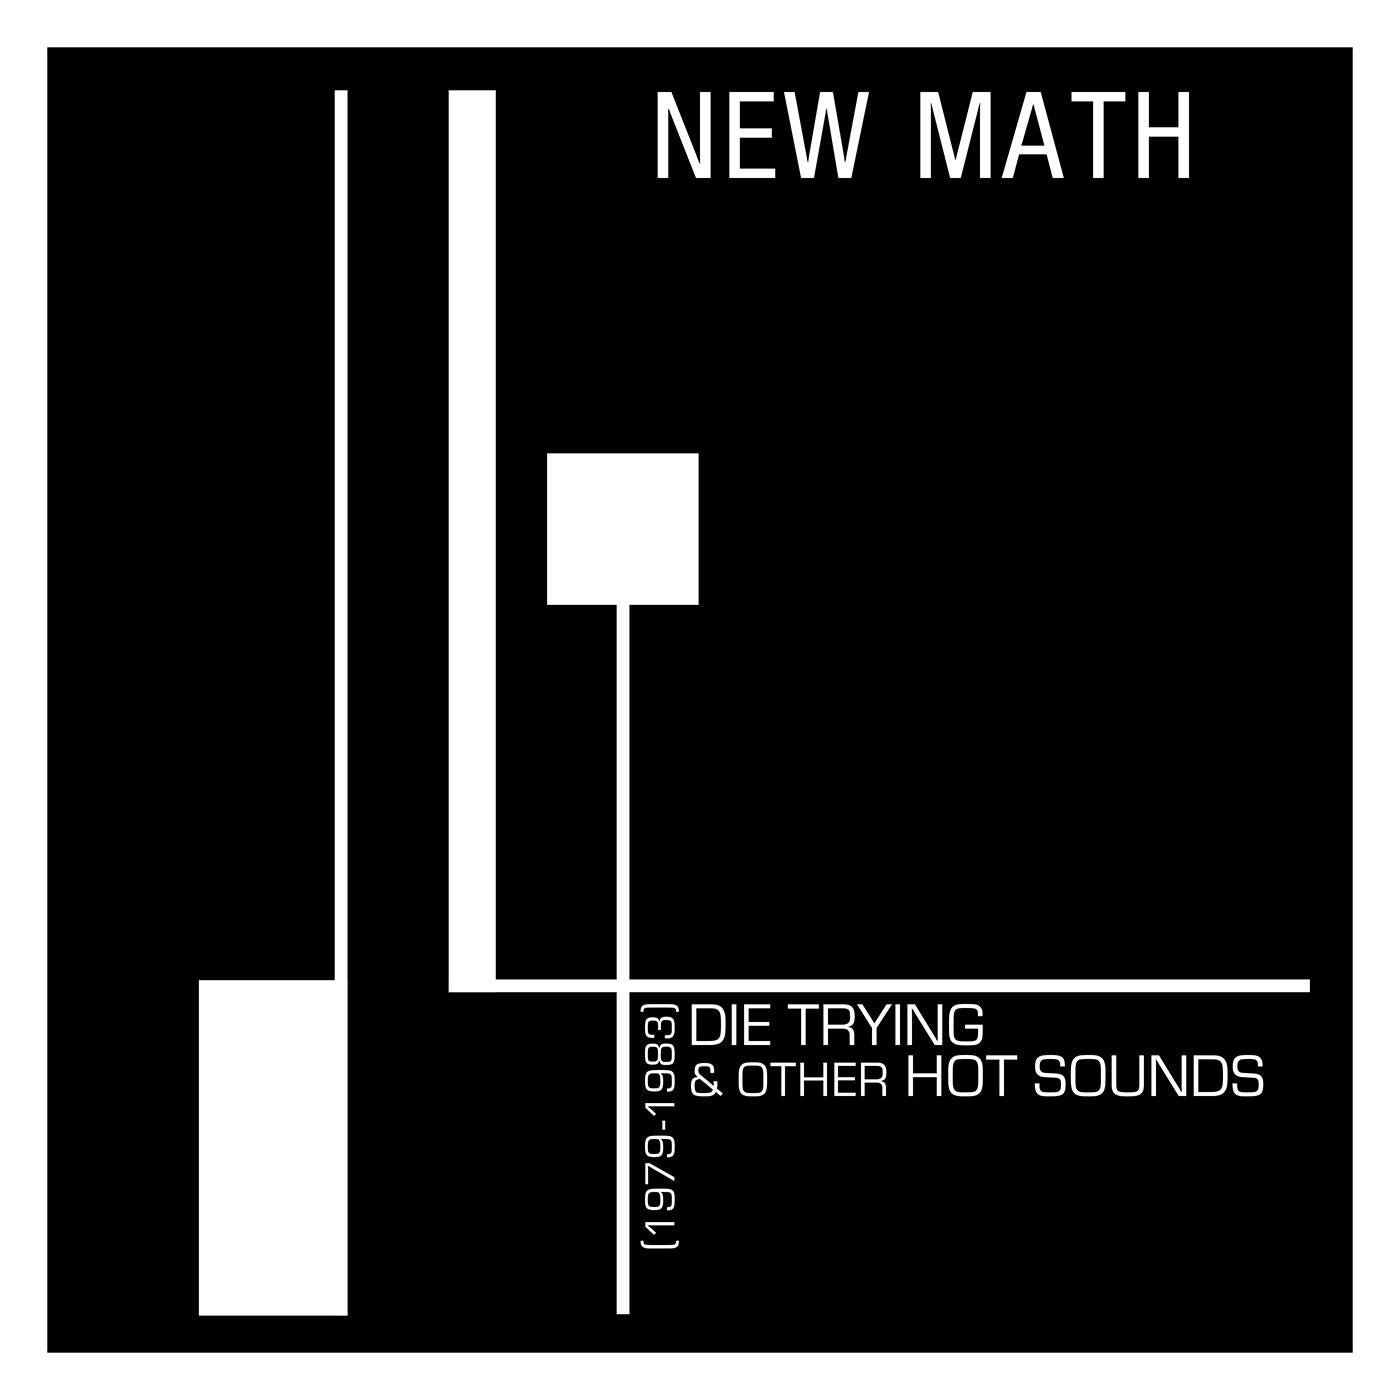 NEW MATH - DIE TRYING & OTHER HOT SOUNDS Vinyl LP